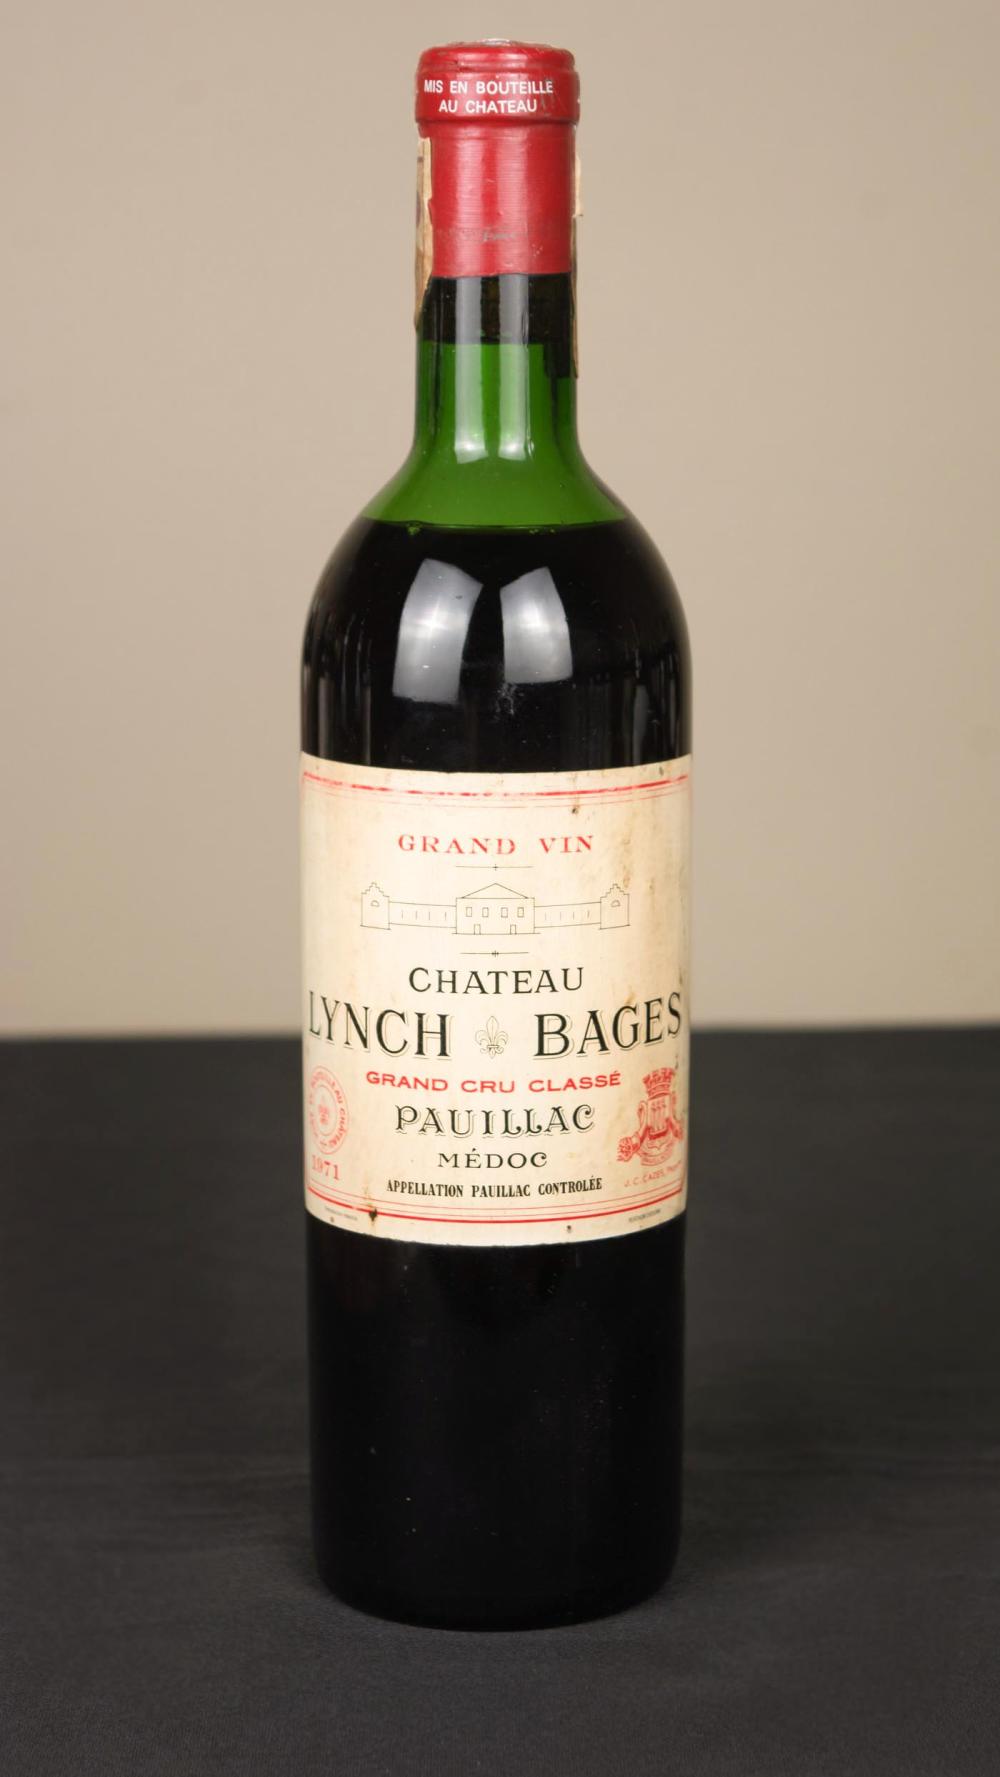 TWO BOTTLES OF VINTAGE FRENCH RED